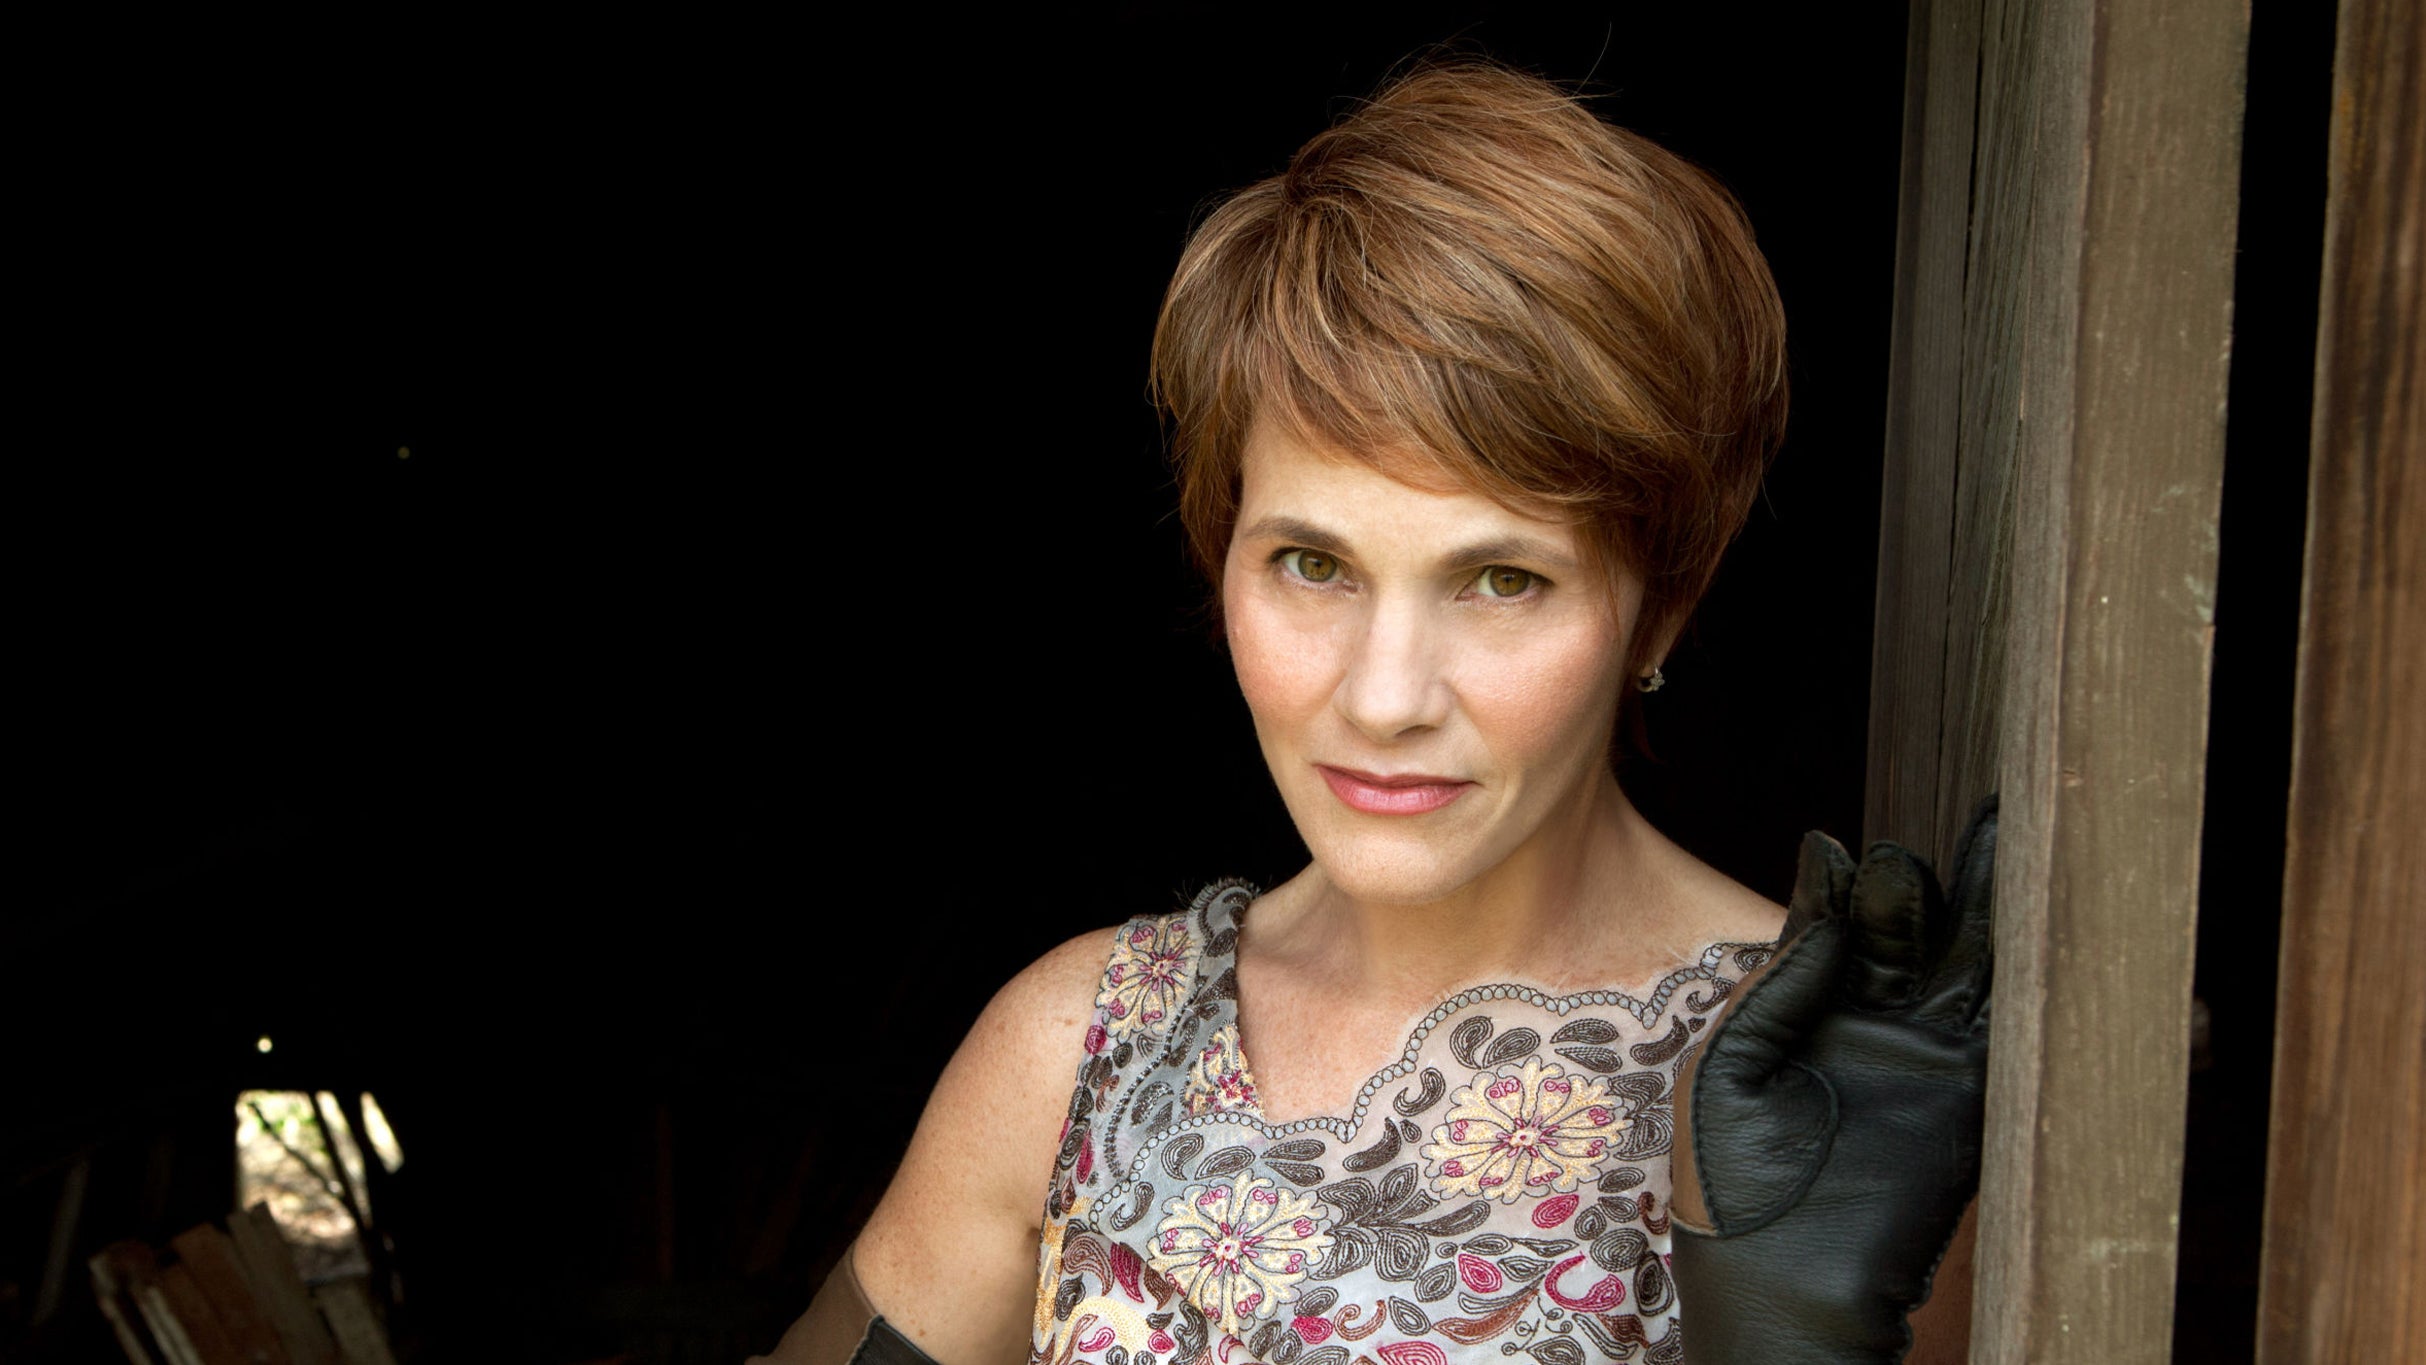 members only presale password to An Evening With Shawn Colvin & KT Tunstall Together On Stage advanced tickets in San Francisco at Herbst Theatre